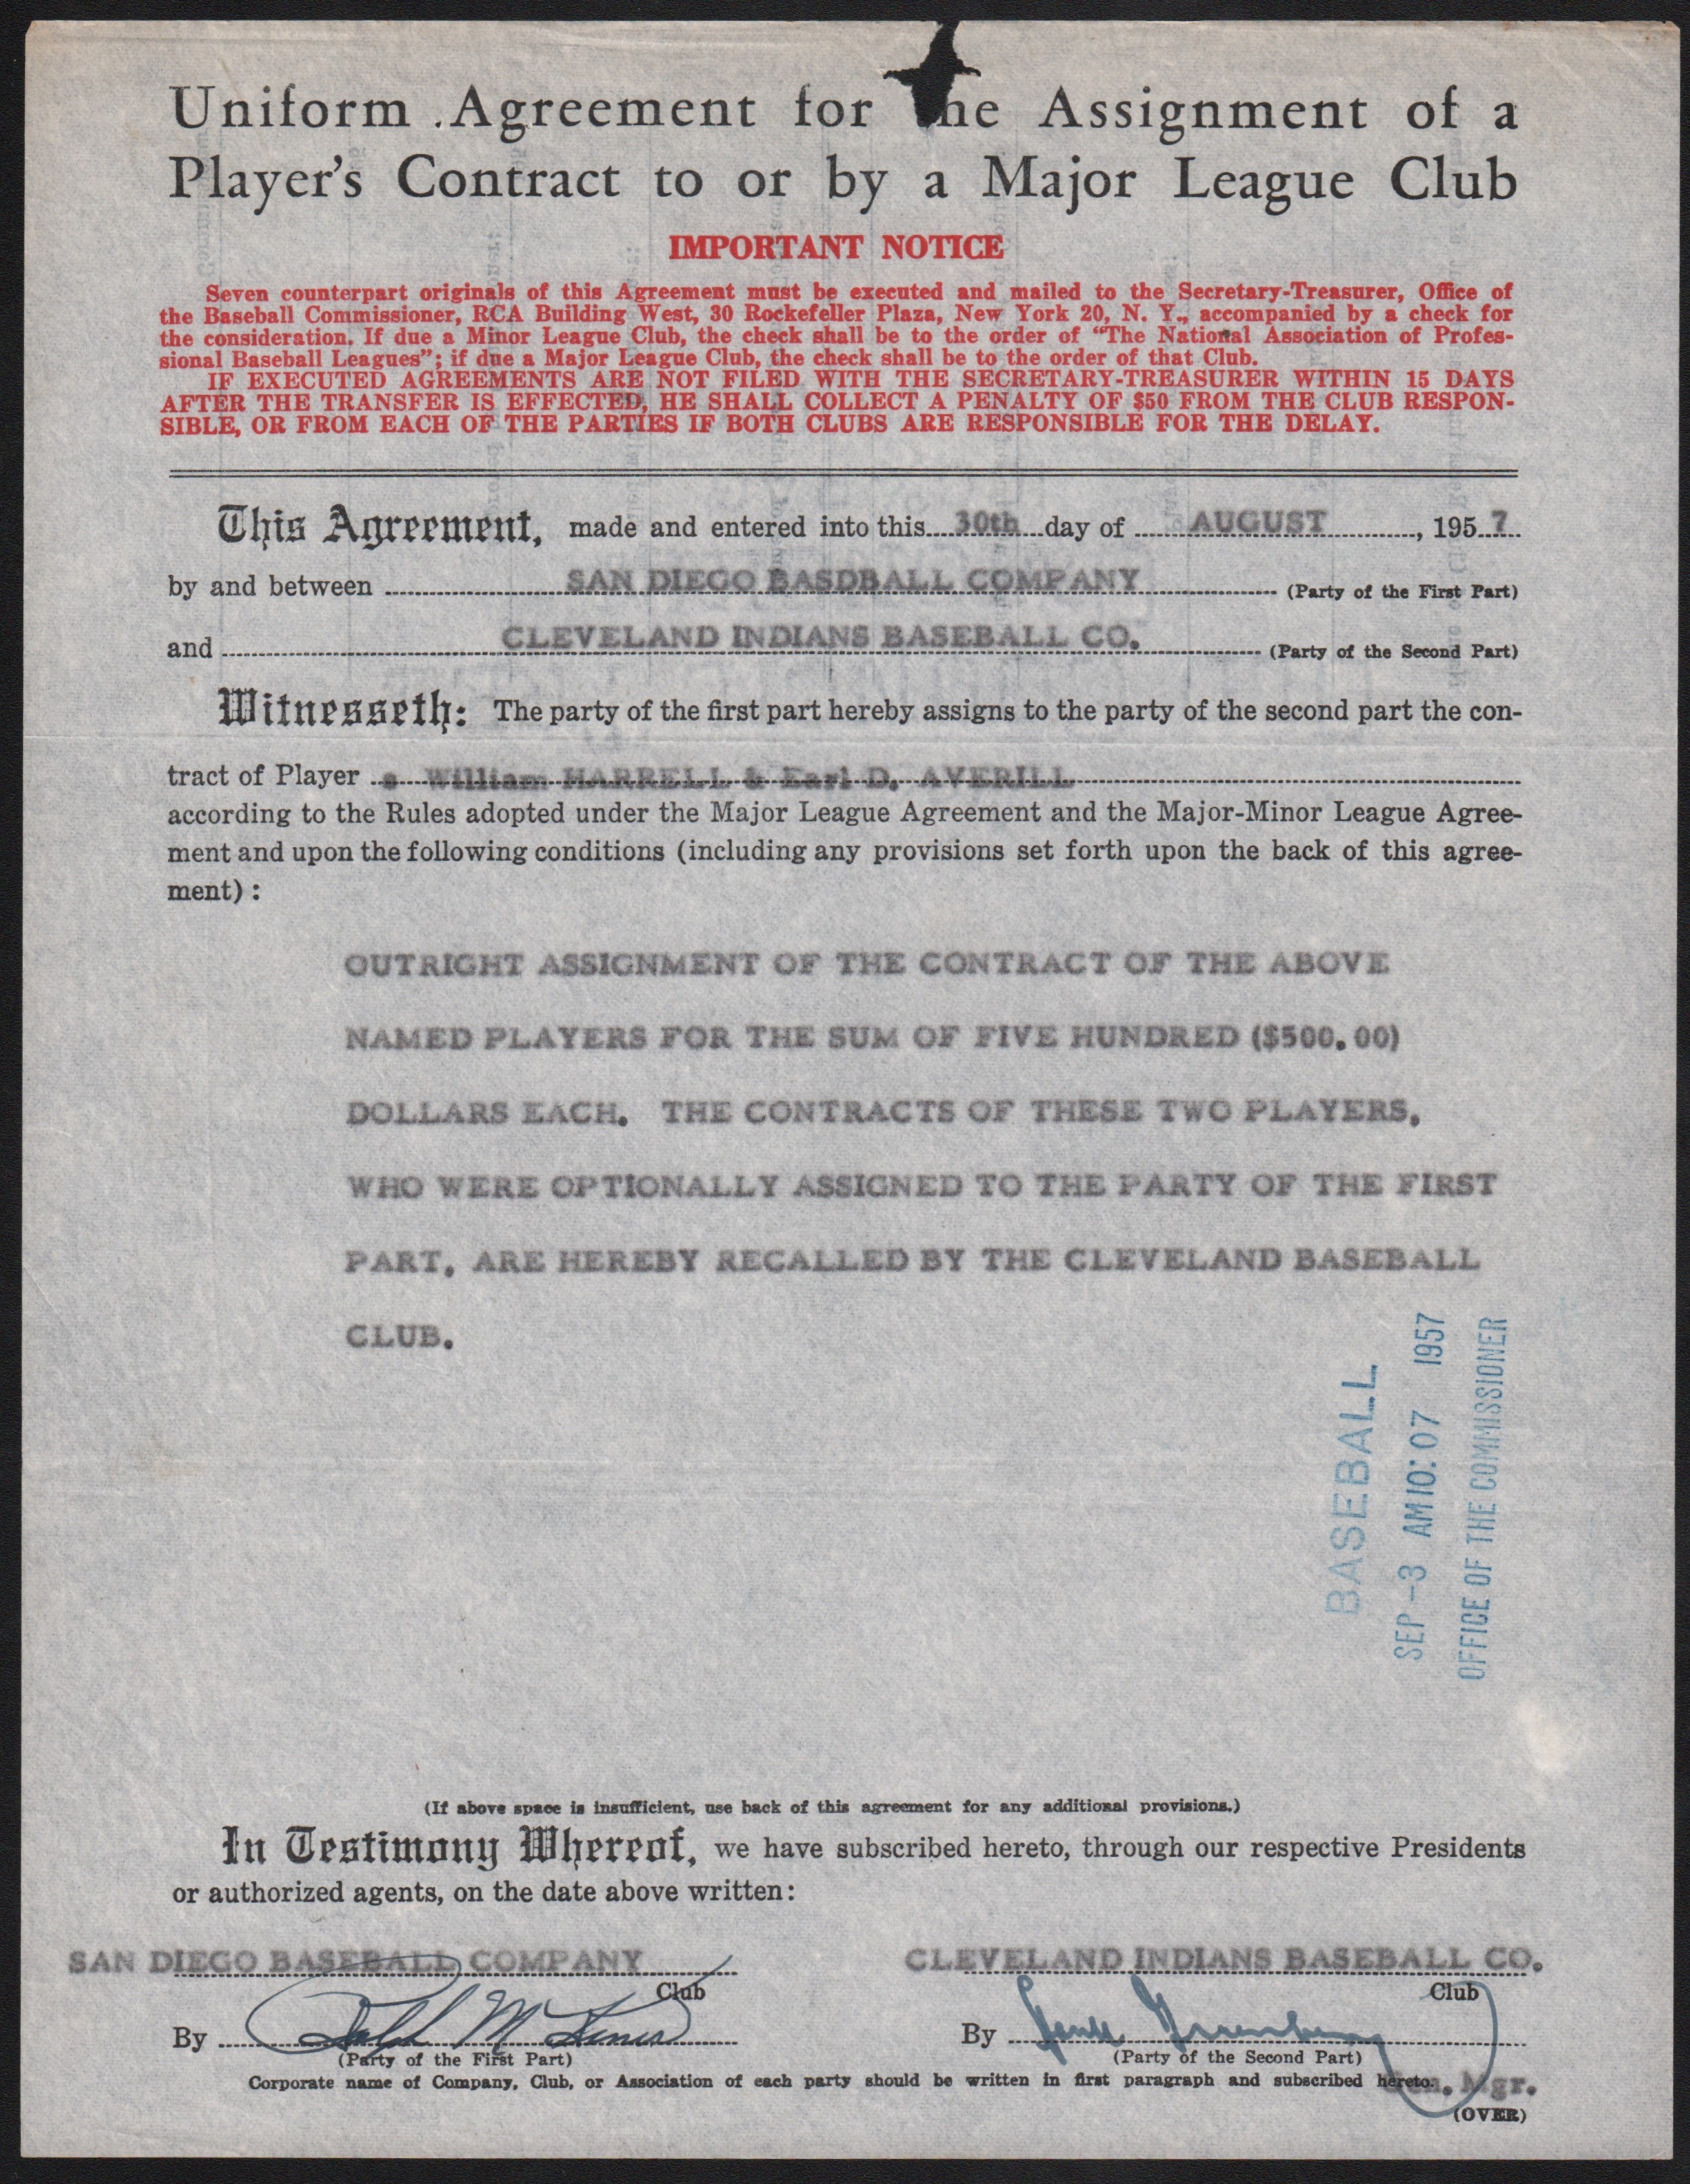 Baseball Autographs - 1957 Earl Averill Trade Agreement Signed by Hank Greenberg and Ralph Kiner